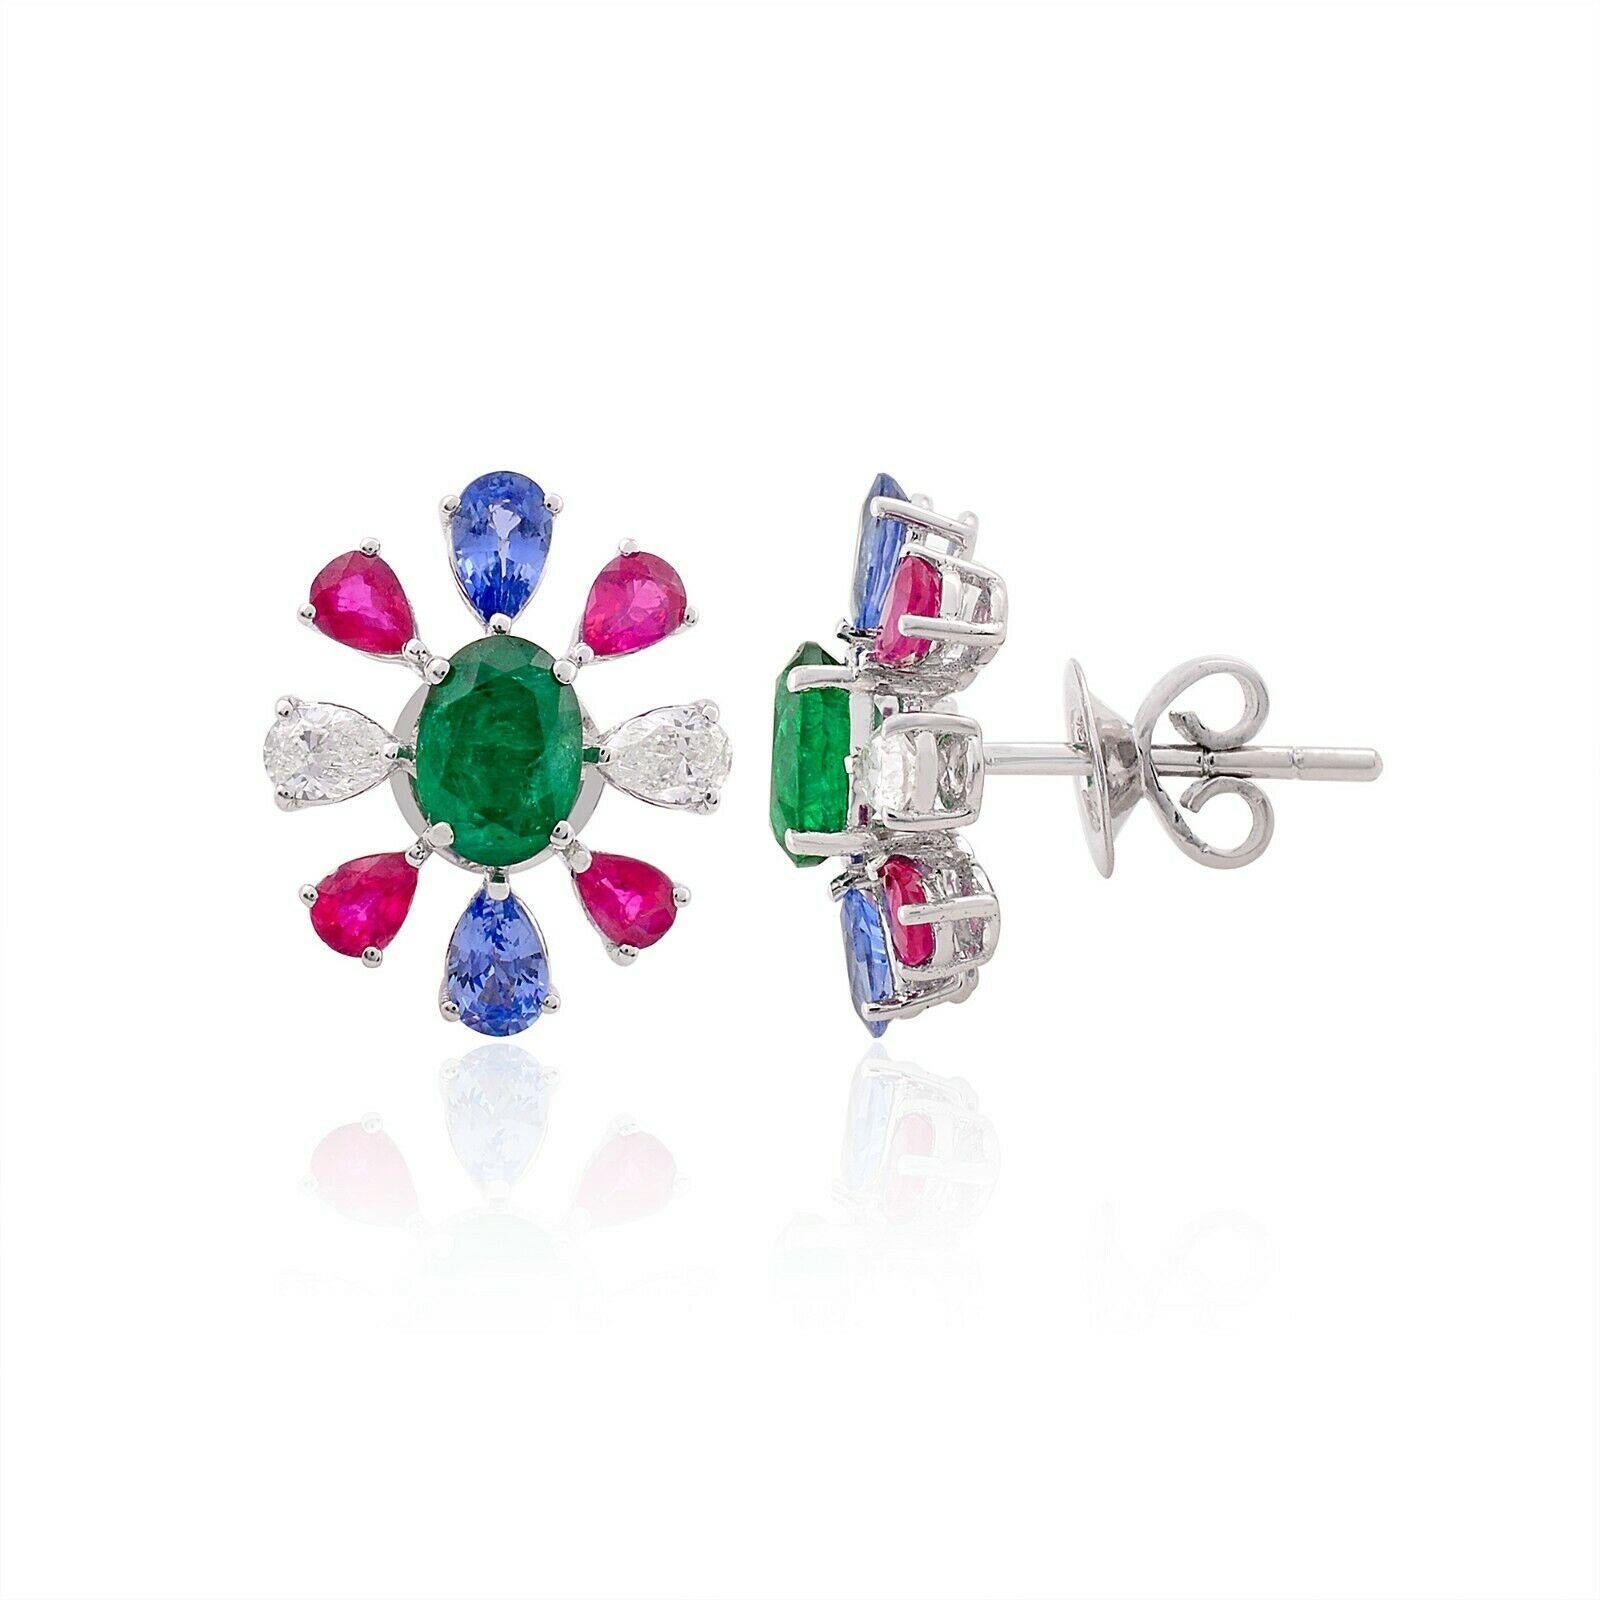 Cast in 14 karat white gold, these stunning stud earrings are hand set with 4.02 carats tanzanite, ruby, emerald and .56 carats of glimmering diamonds. 

FOLLOW MEGHNA JEWELS storefront to view the latest collection & exclusive pieces. Meghna Jewels